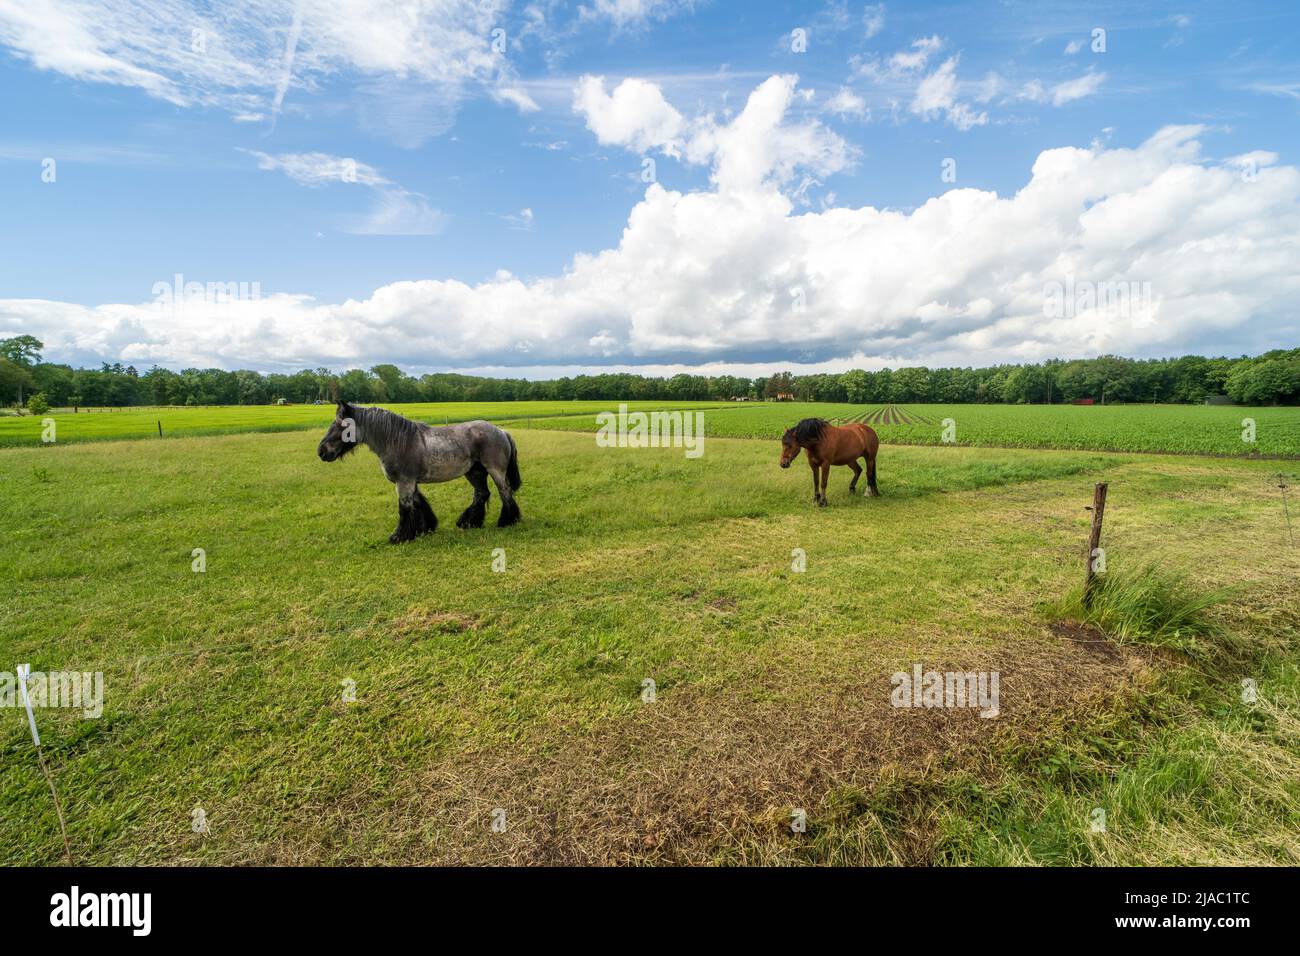 Two horses on an agricultural field in the area of Kinrooi, Belgium near the dutch border Stock Photo